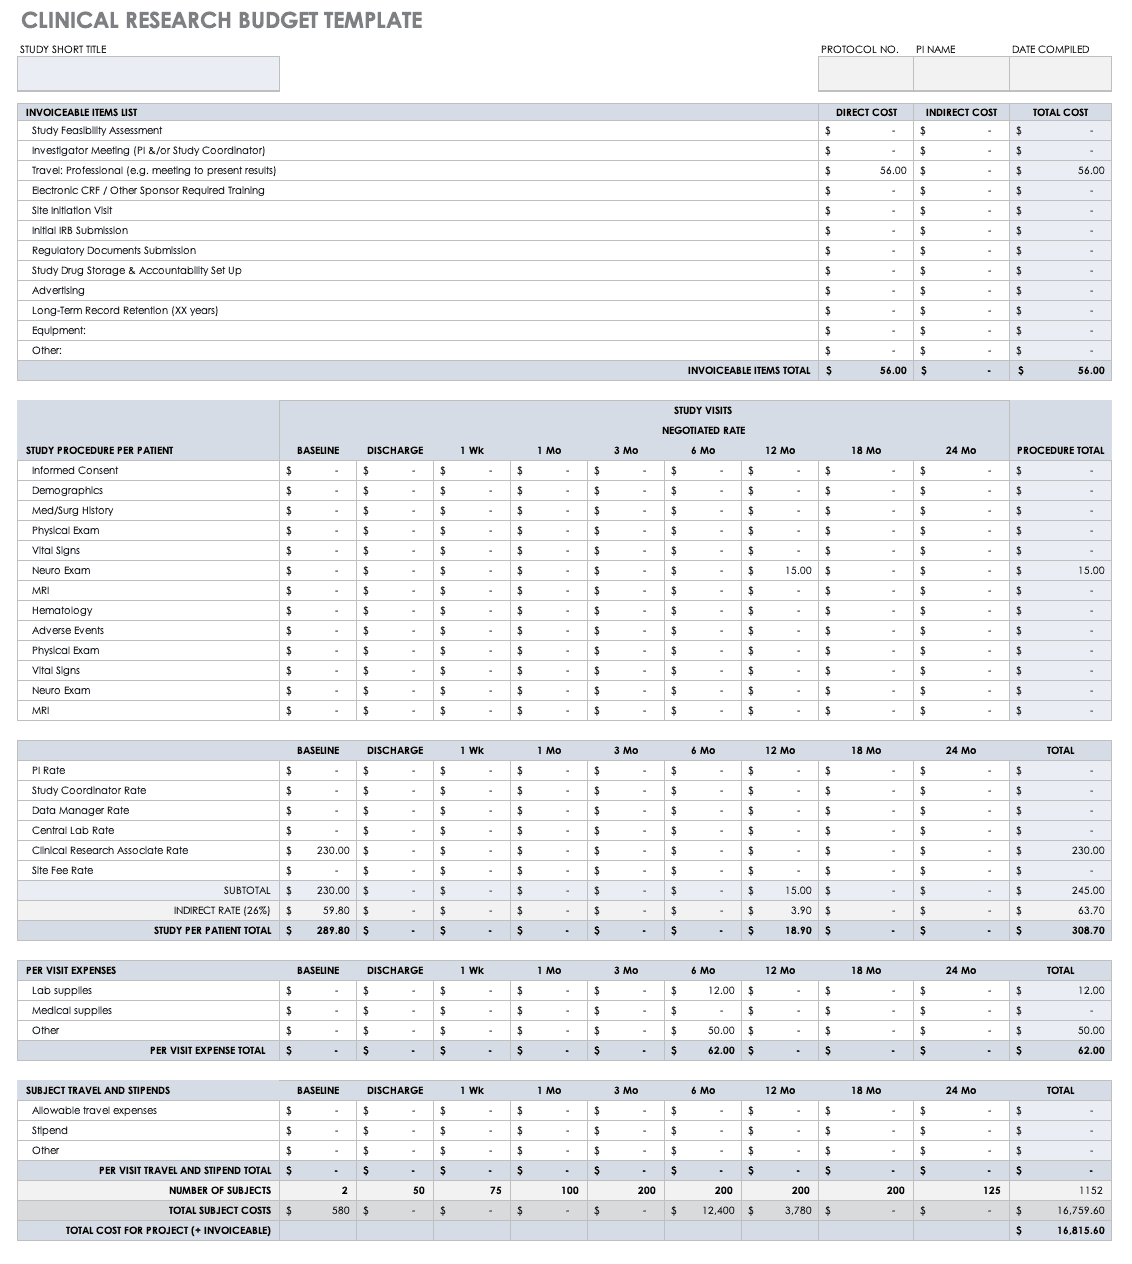 Free Clinical Trial Templates | Smartsheet With Monitoring Report Template Clinical Trials